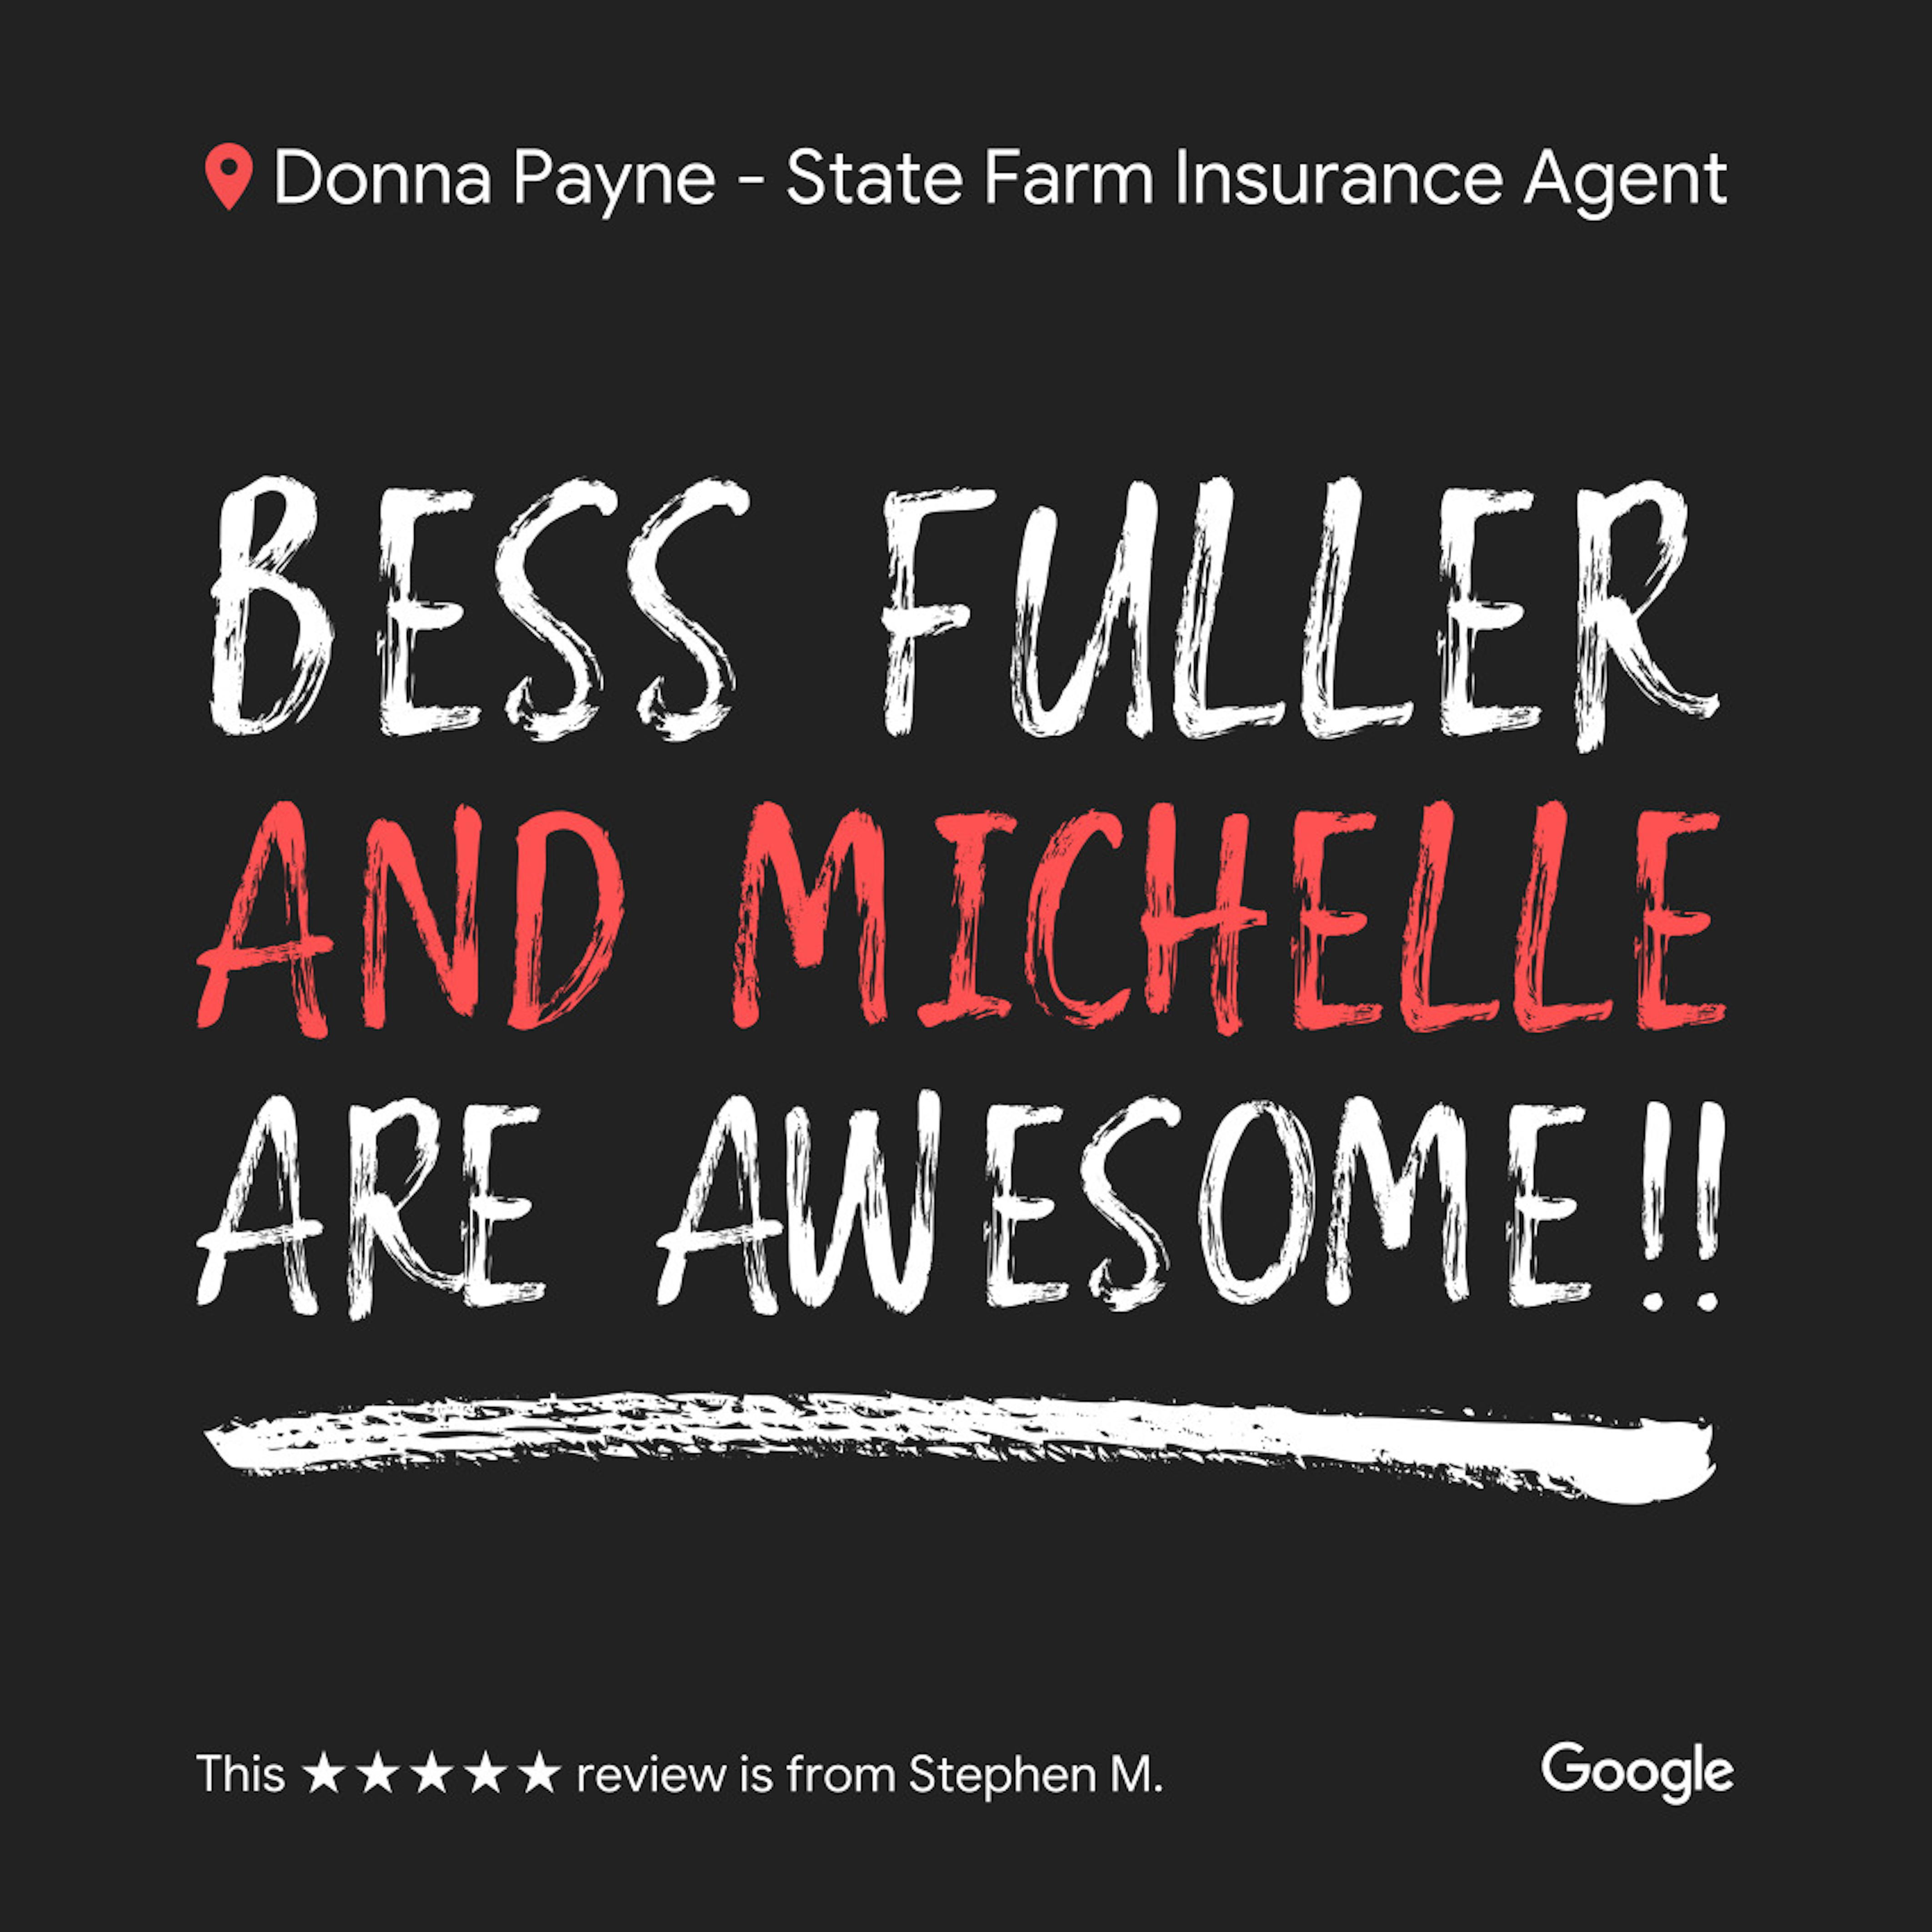 Thank you for the wonderful review, Stephen! Bess and Michelle are fantastic assets to our team, and we’re happy to hear they've been able to take care of you!